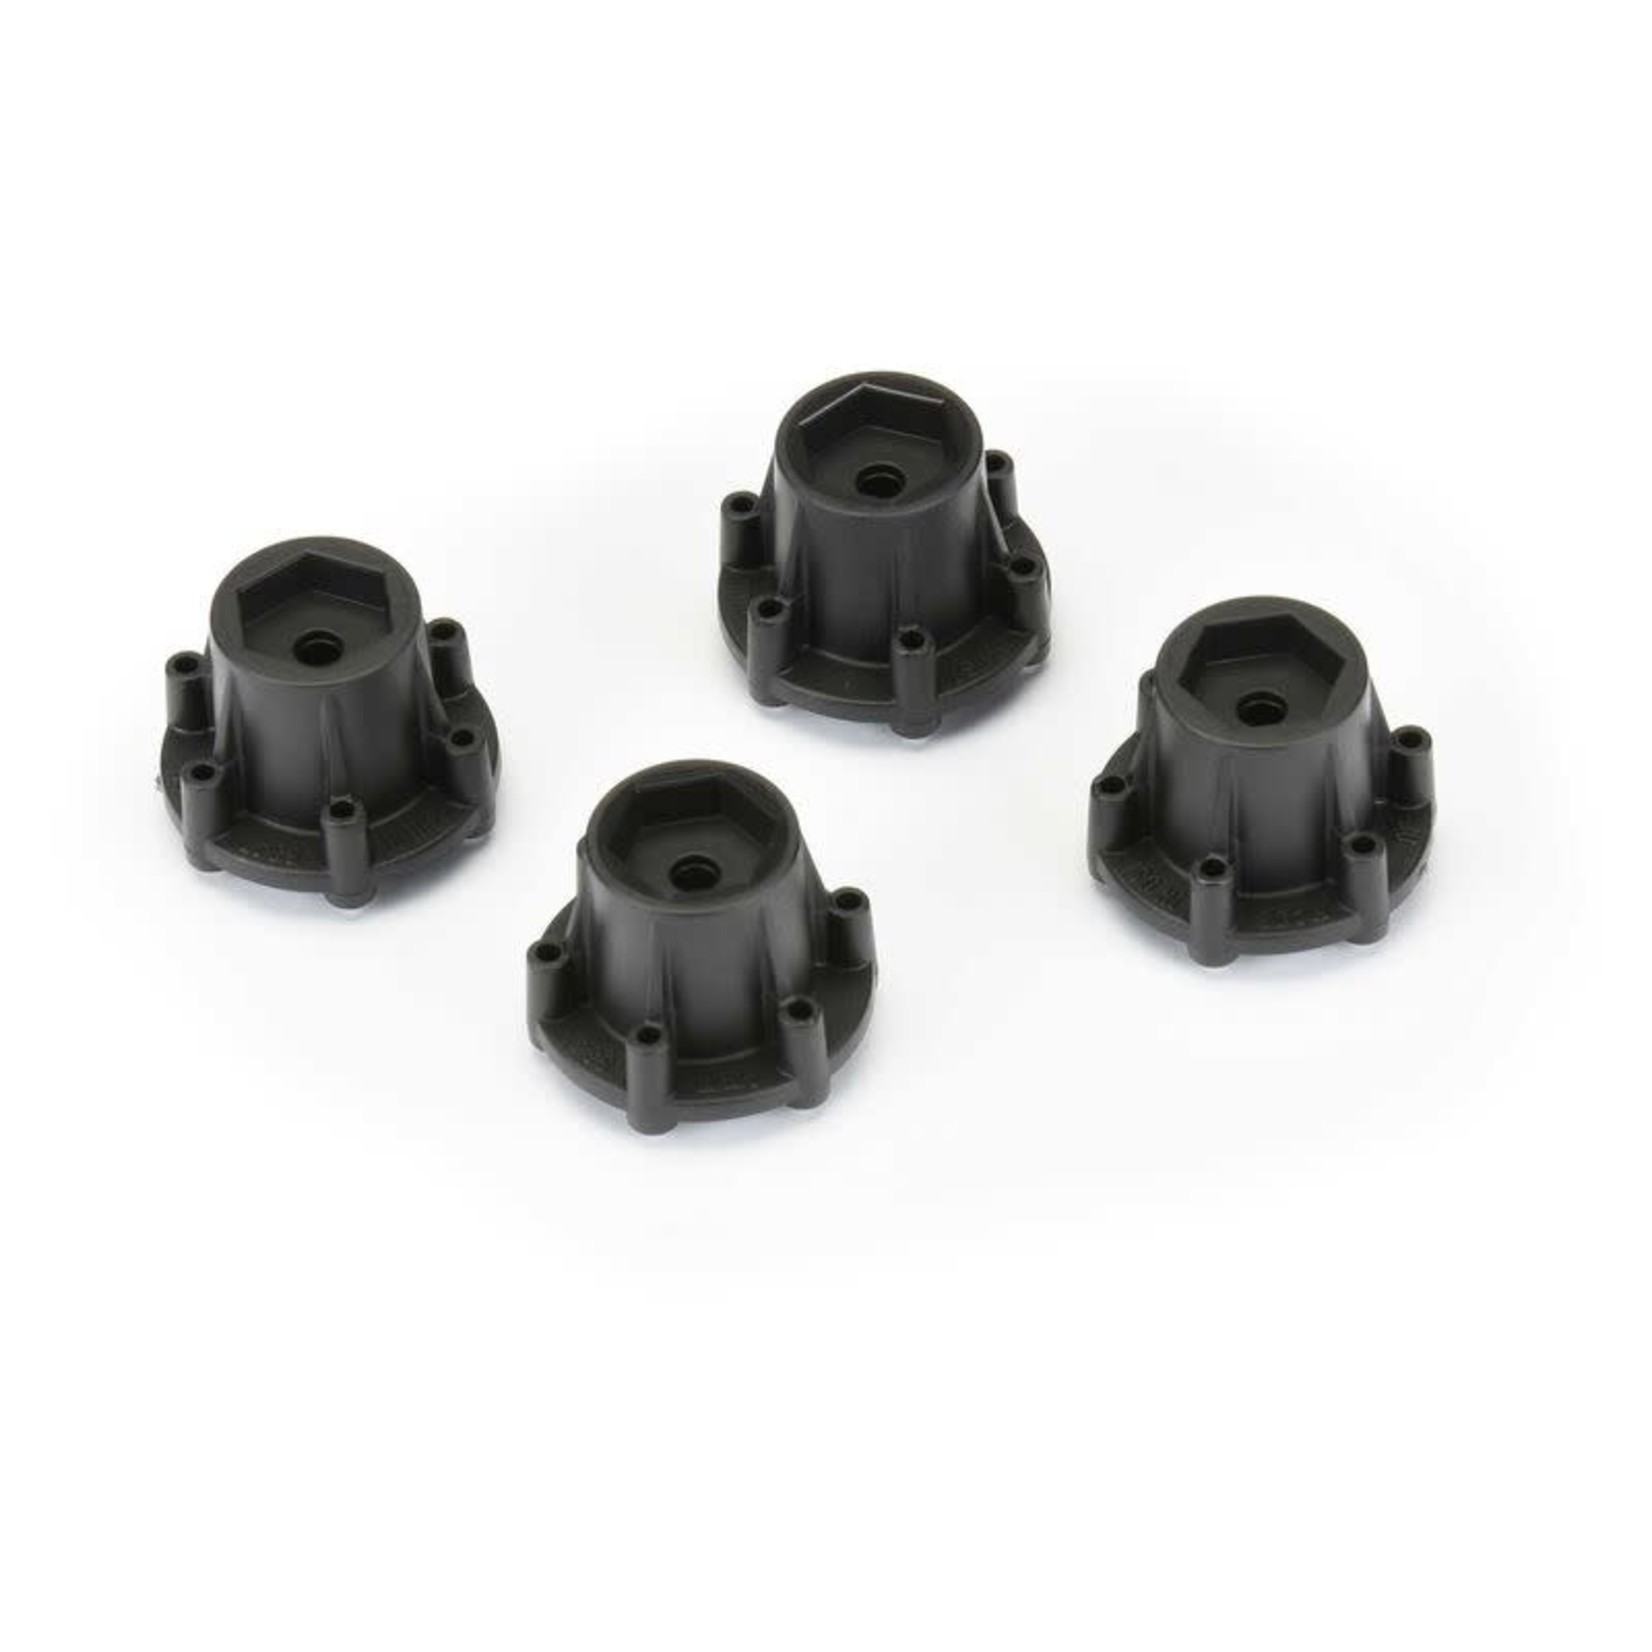 Pro-line Racing PRO634700 Pro-Line 1/10 6x30 to 14mm Hex Adapters